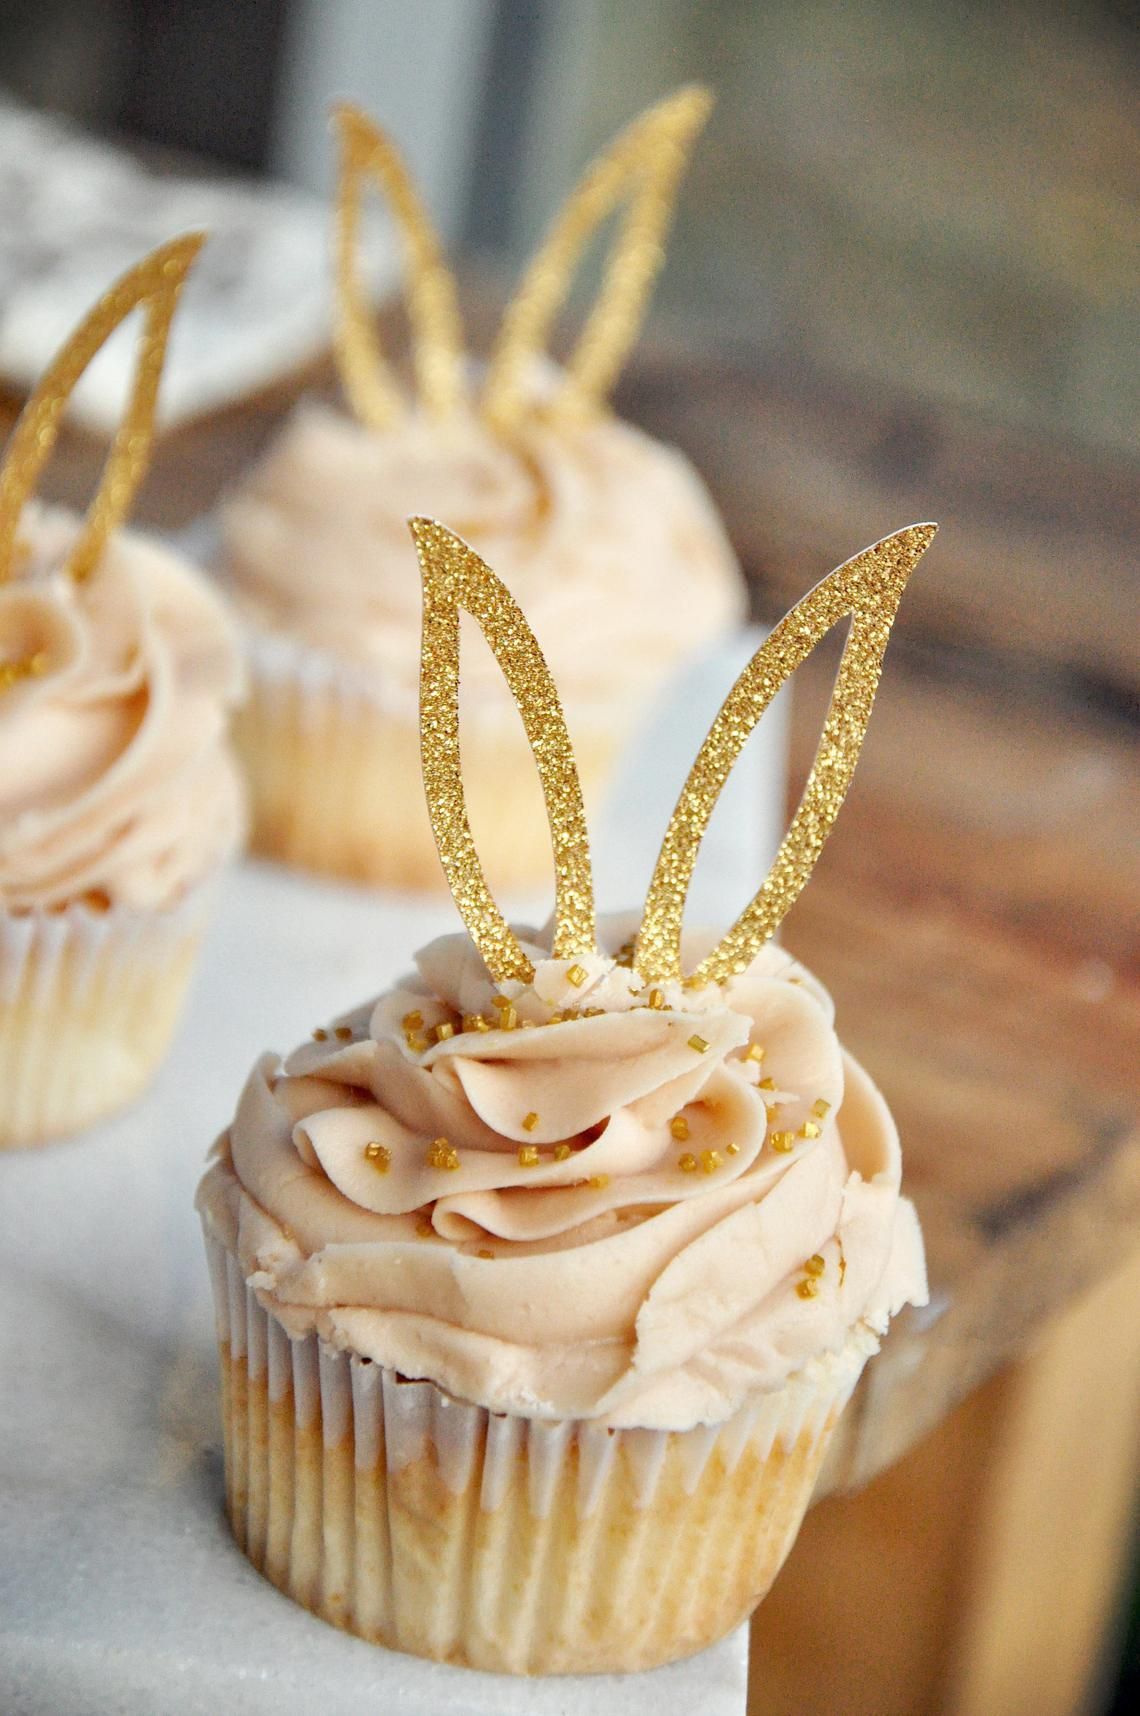 18 holiday Easter baby shower ideas